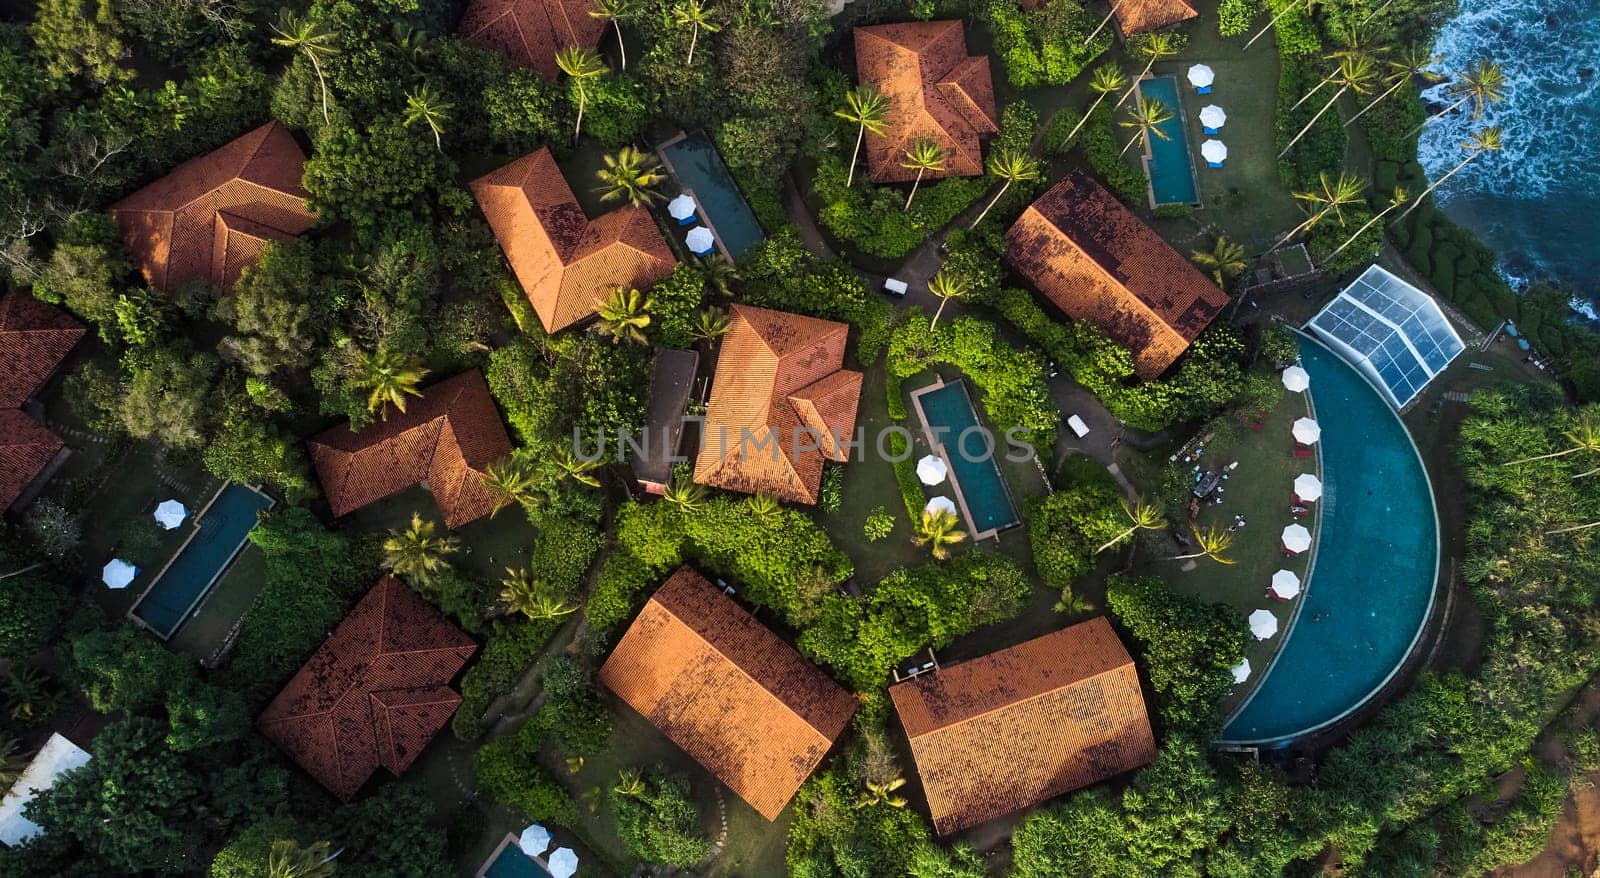 Aerial view of a premium hotel complex with swimming pools in Sri Lanka. High quality photo